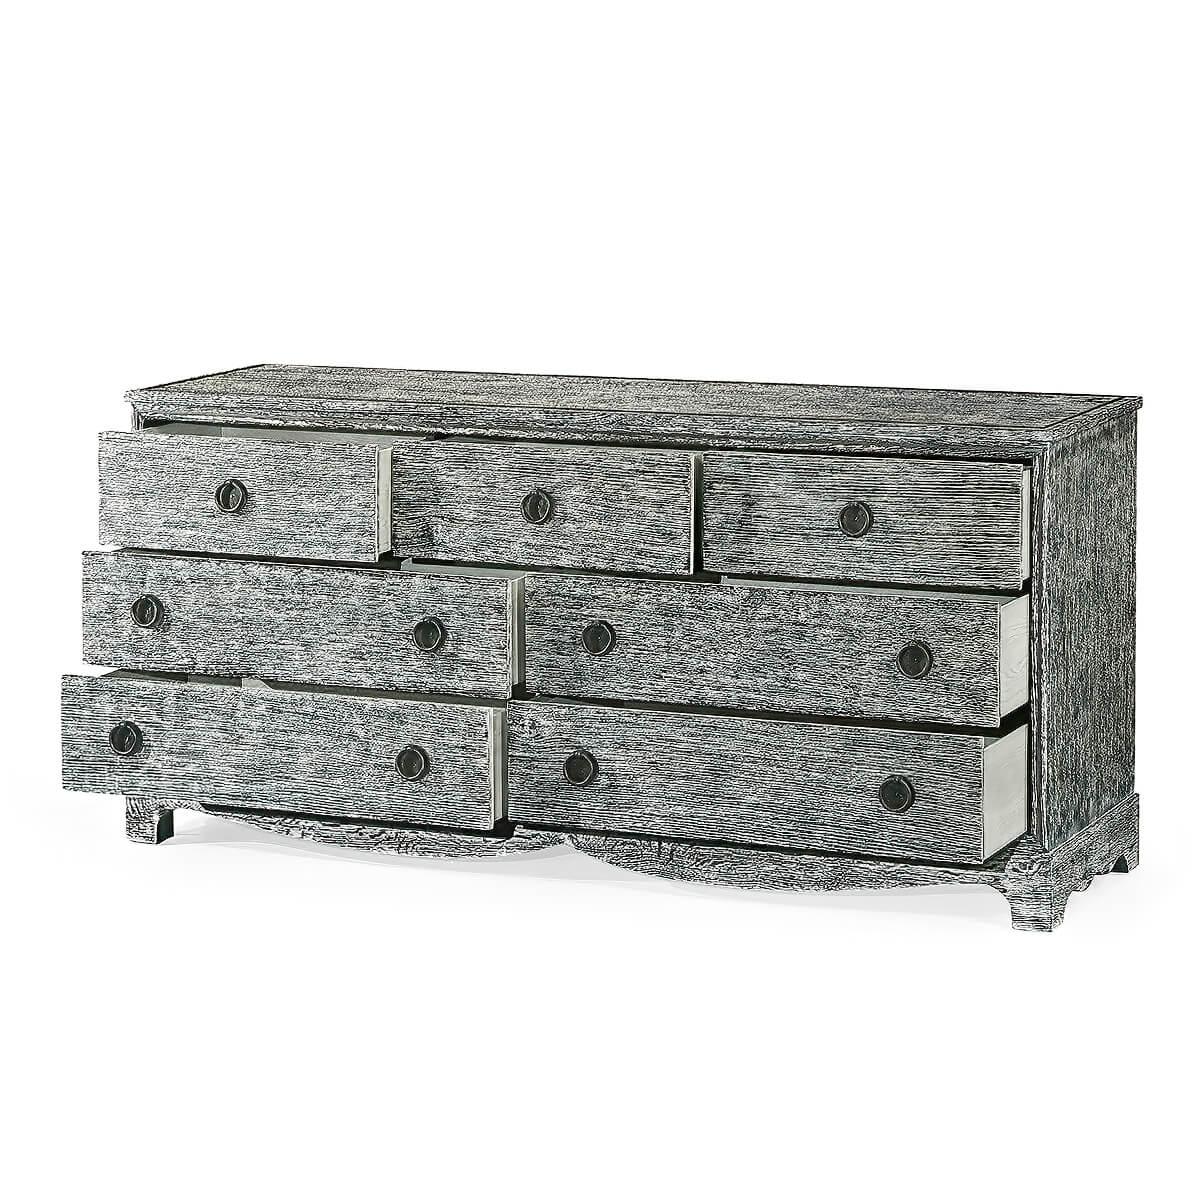 An unusual country grey washed wenge seven drawer dresser with iron trim and ring handles raised above a scalloped apron and bracket feet.

Dimensions: 72